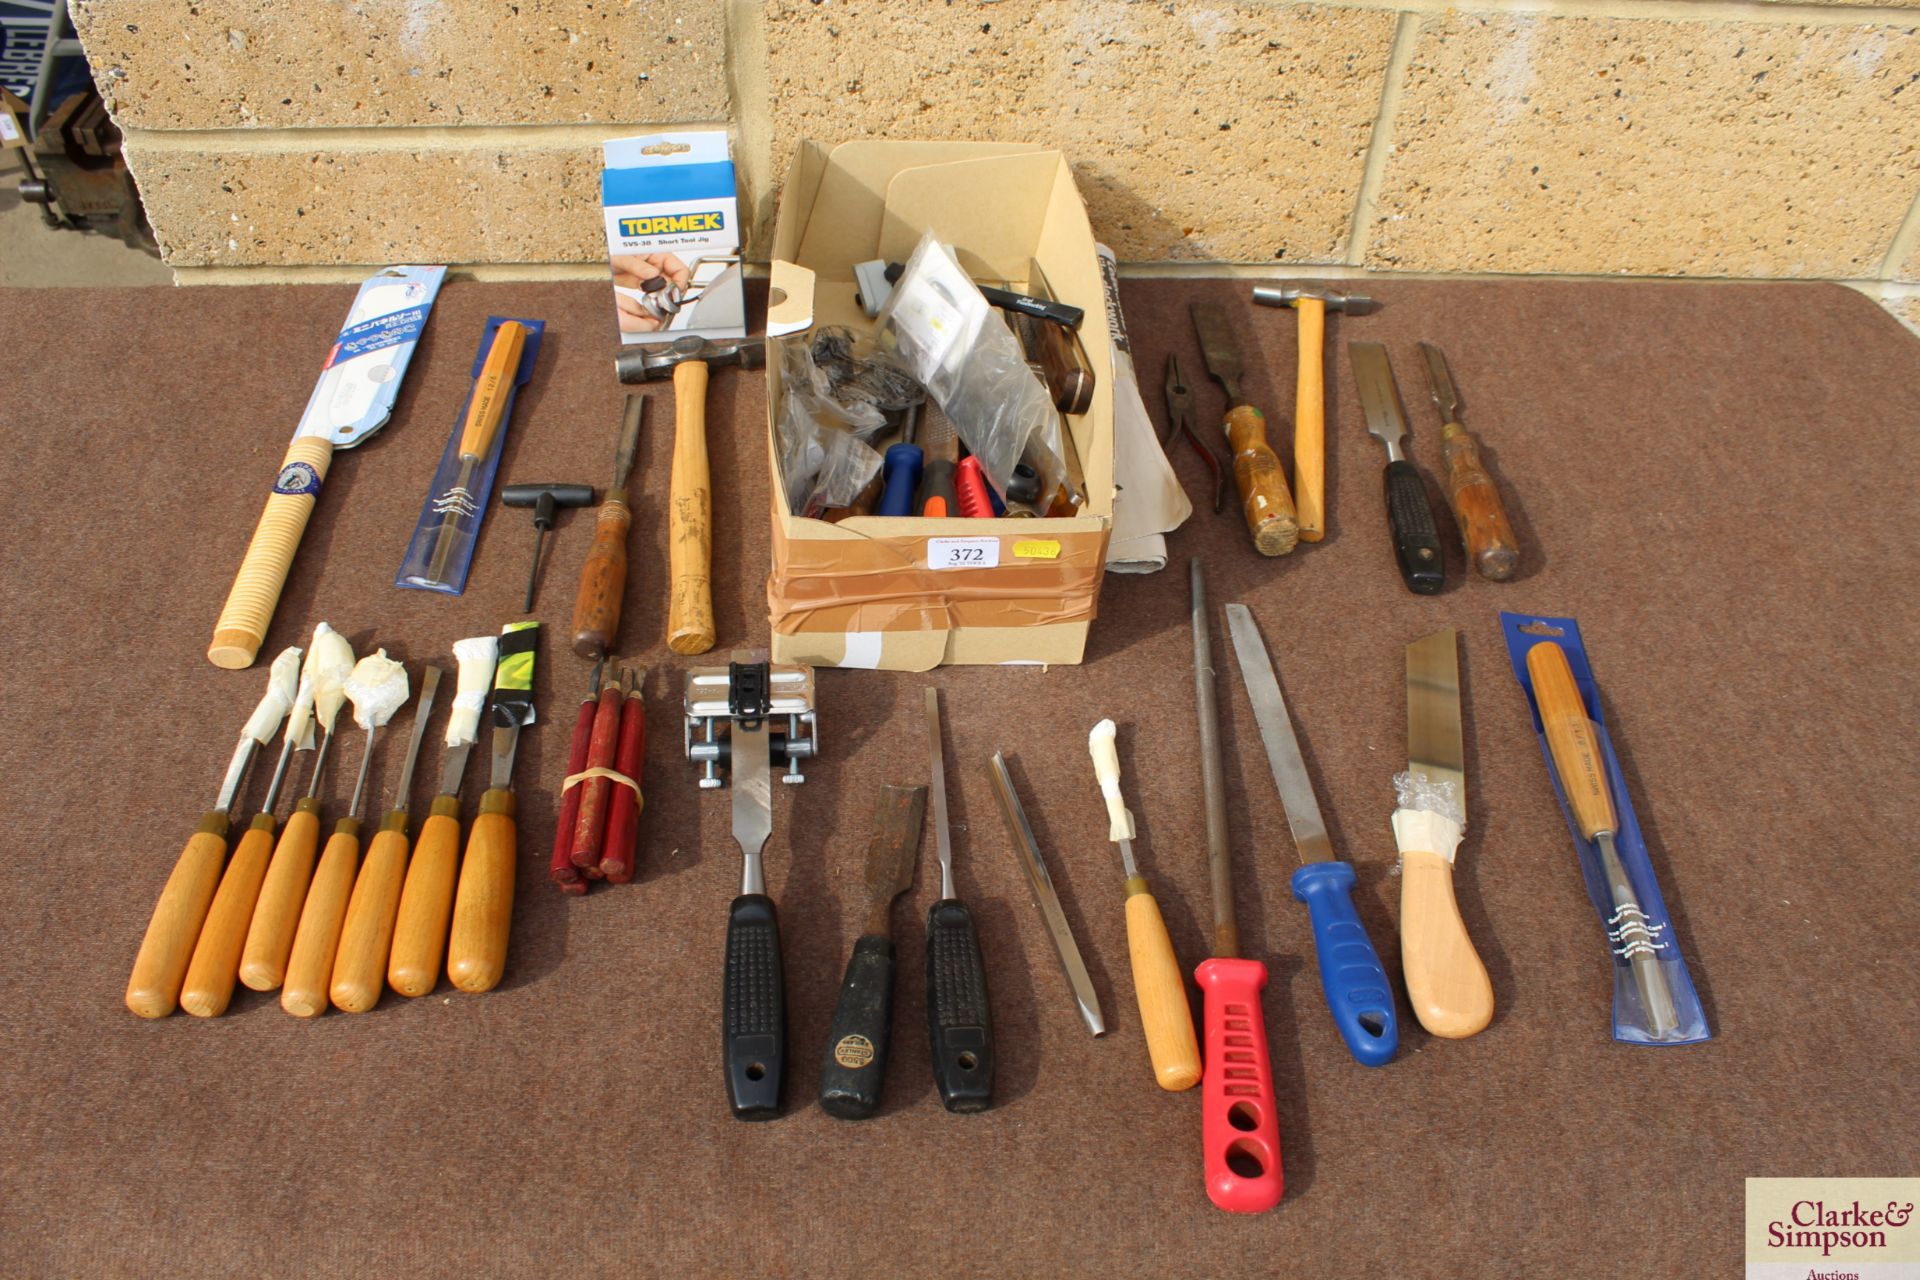 Tray containing large quantity of woodworking and other chisels, guides etc.